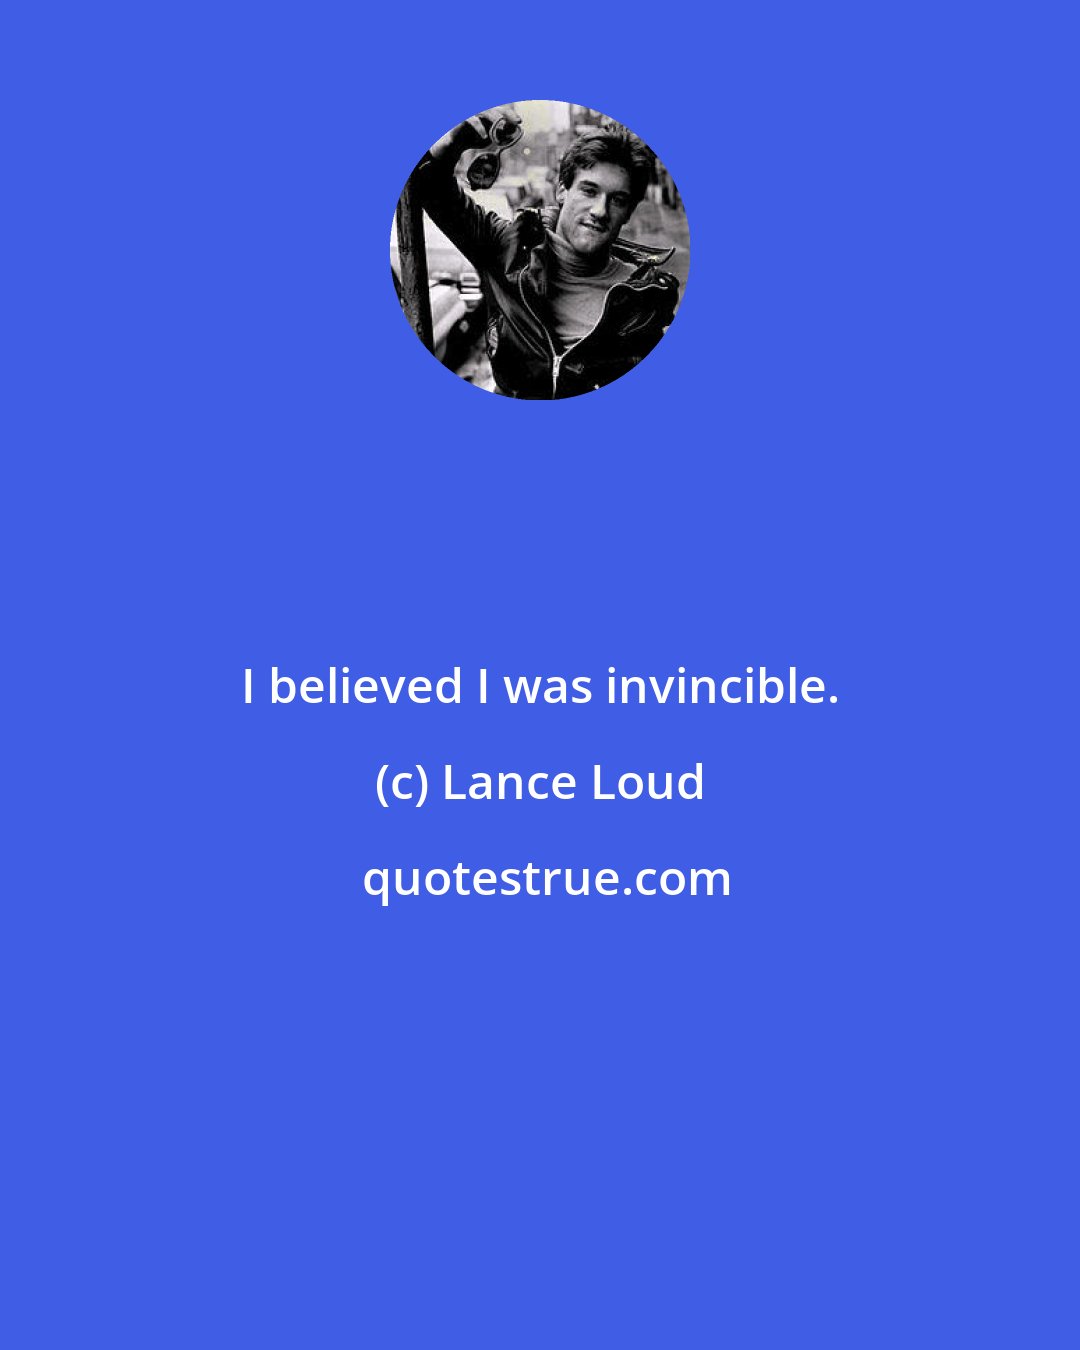 Lance Loud: I believed I was invincible.